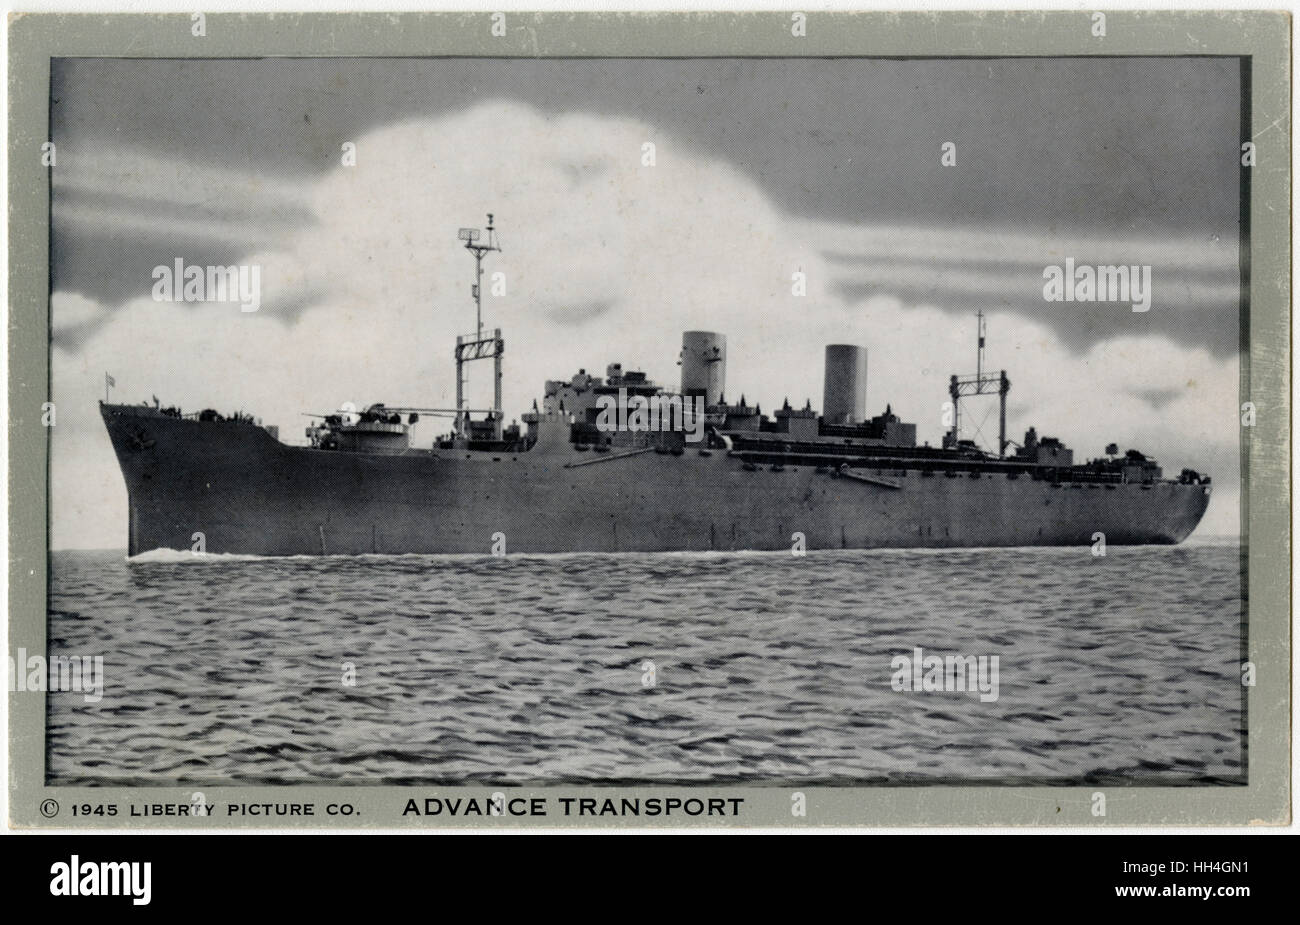 An American Liberty Ship (a prefabricated US-built freighter (emergency cargo ships) of the Second World War) - providing advance transport. Stock Photo